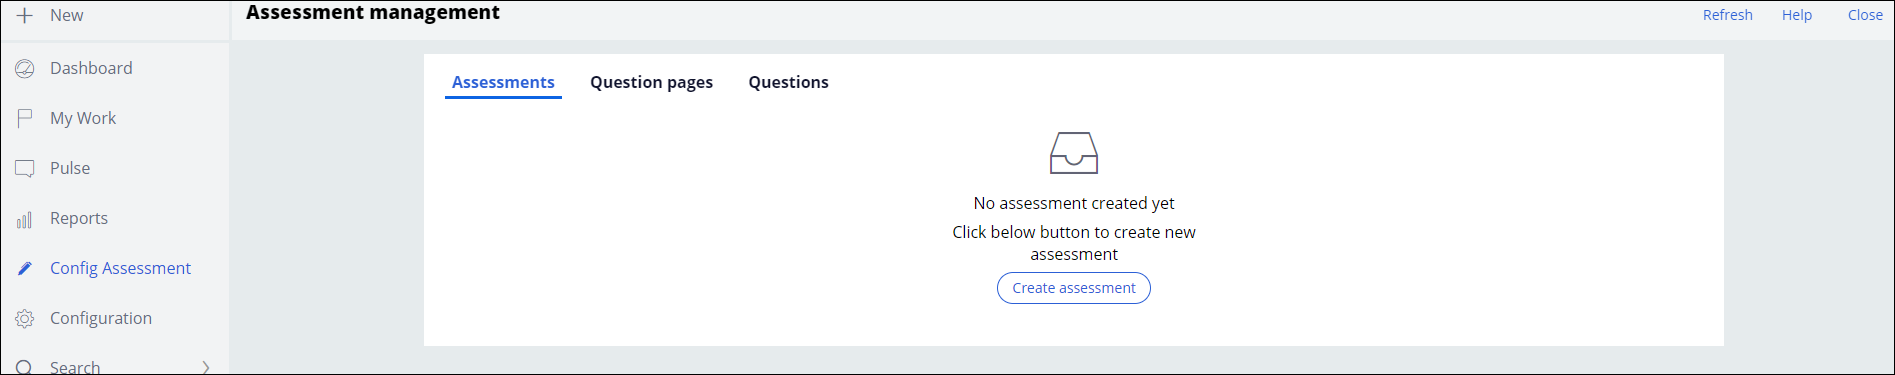 A part of the assessment management section that shows an option to create
                assessment